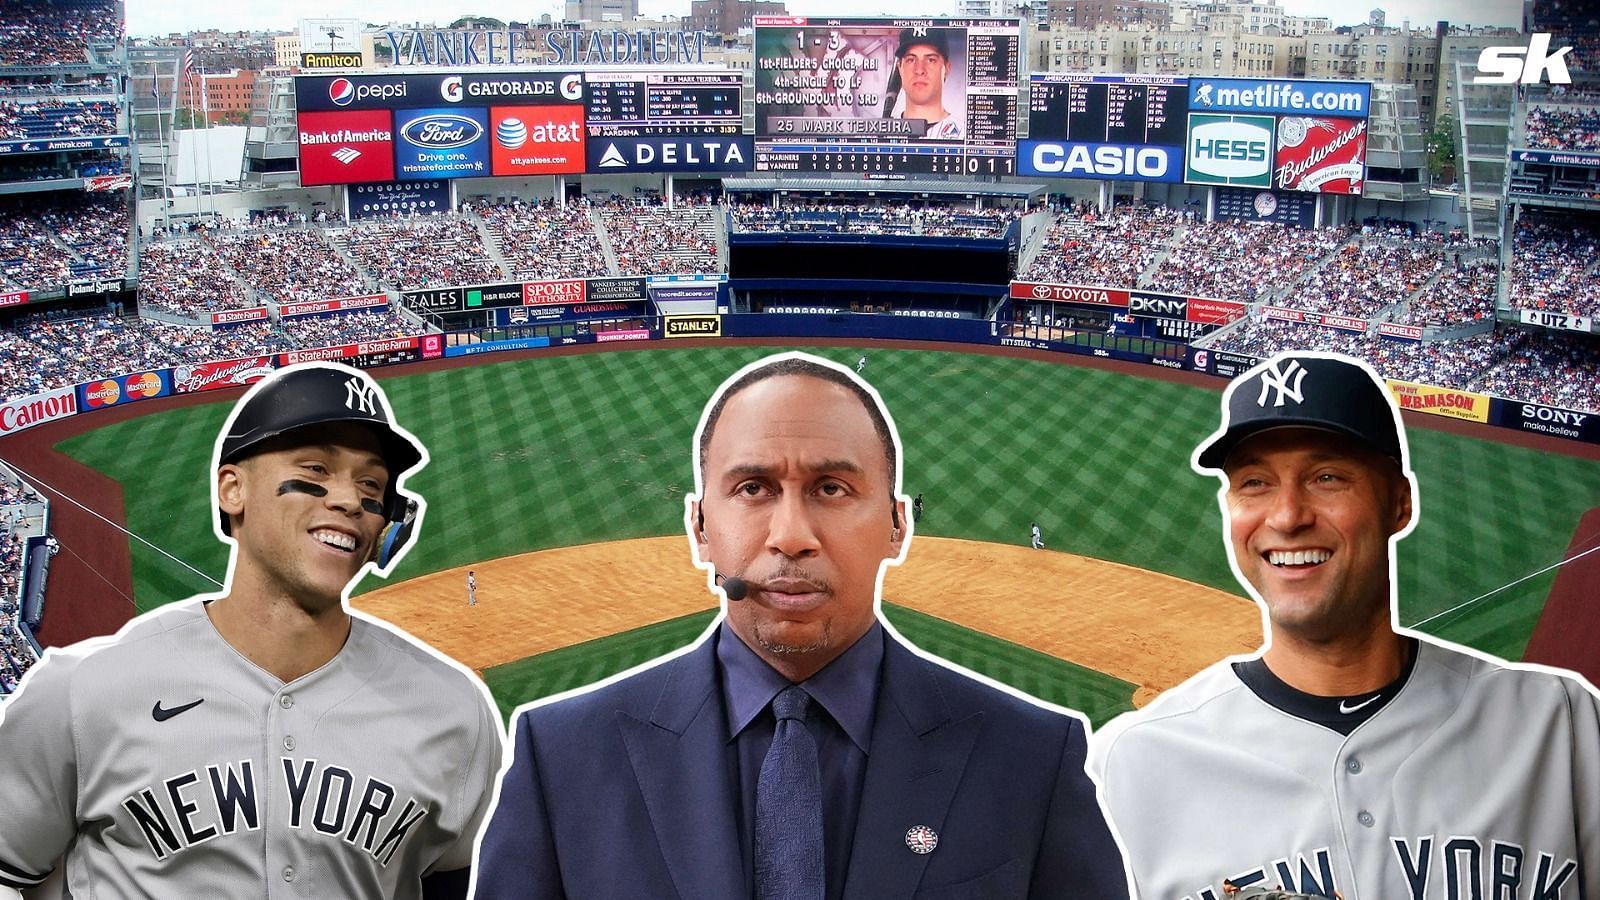 Yankees captain Aaron Judge apparently piled on additional mockery of Stephen A. Smith